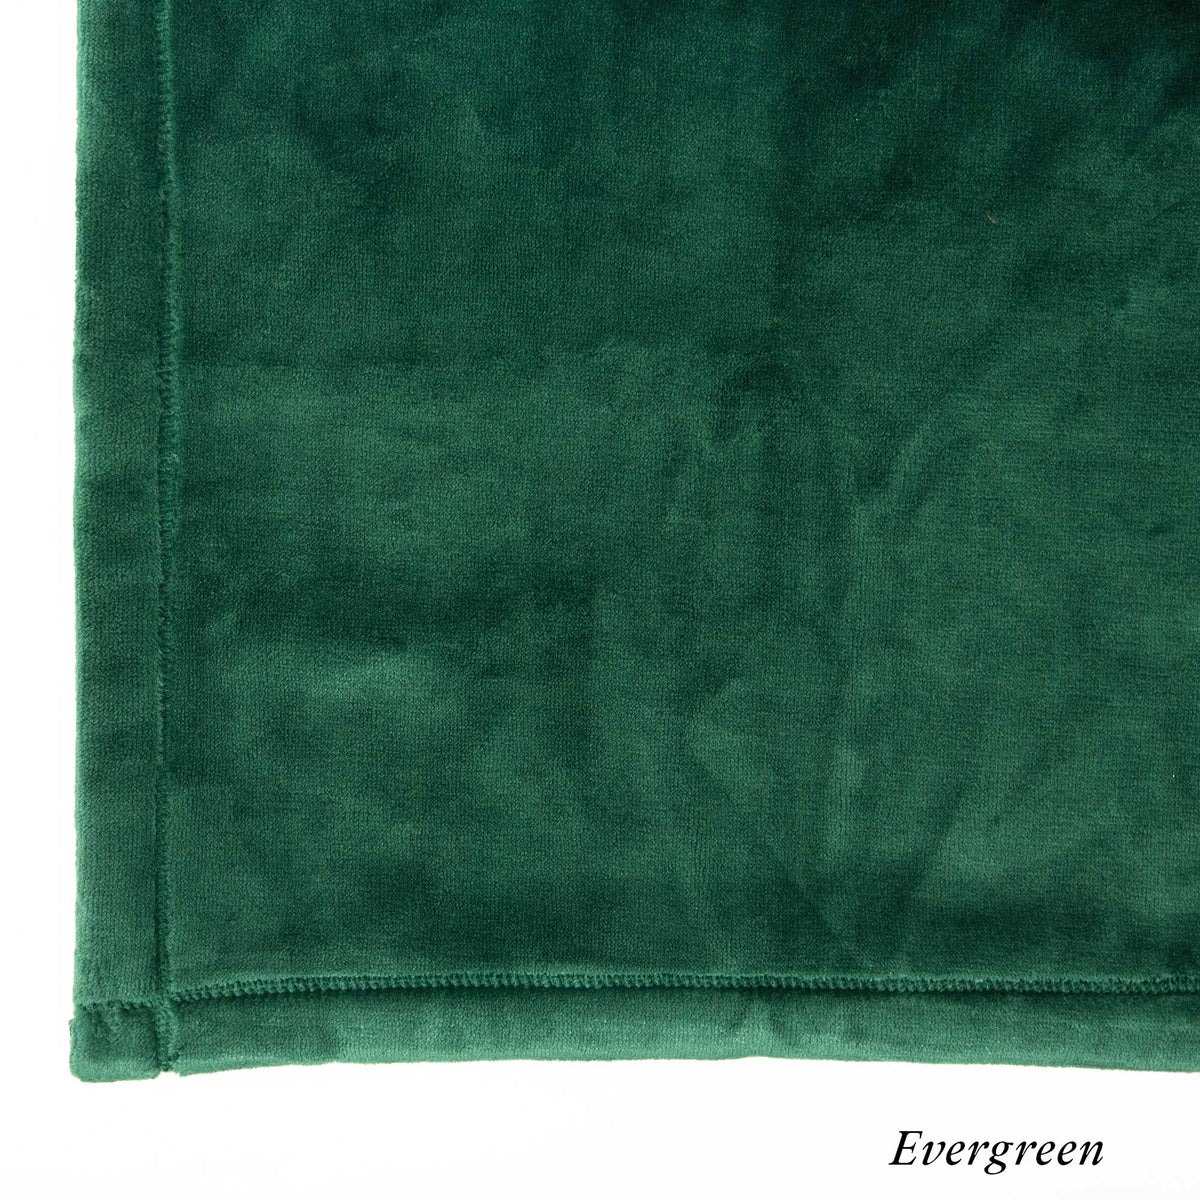 Evergreen - Assorted Corporate Gift - Luster Loft Fleece Throws - American Blanket Company